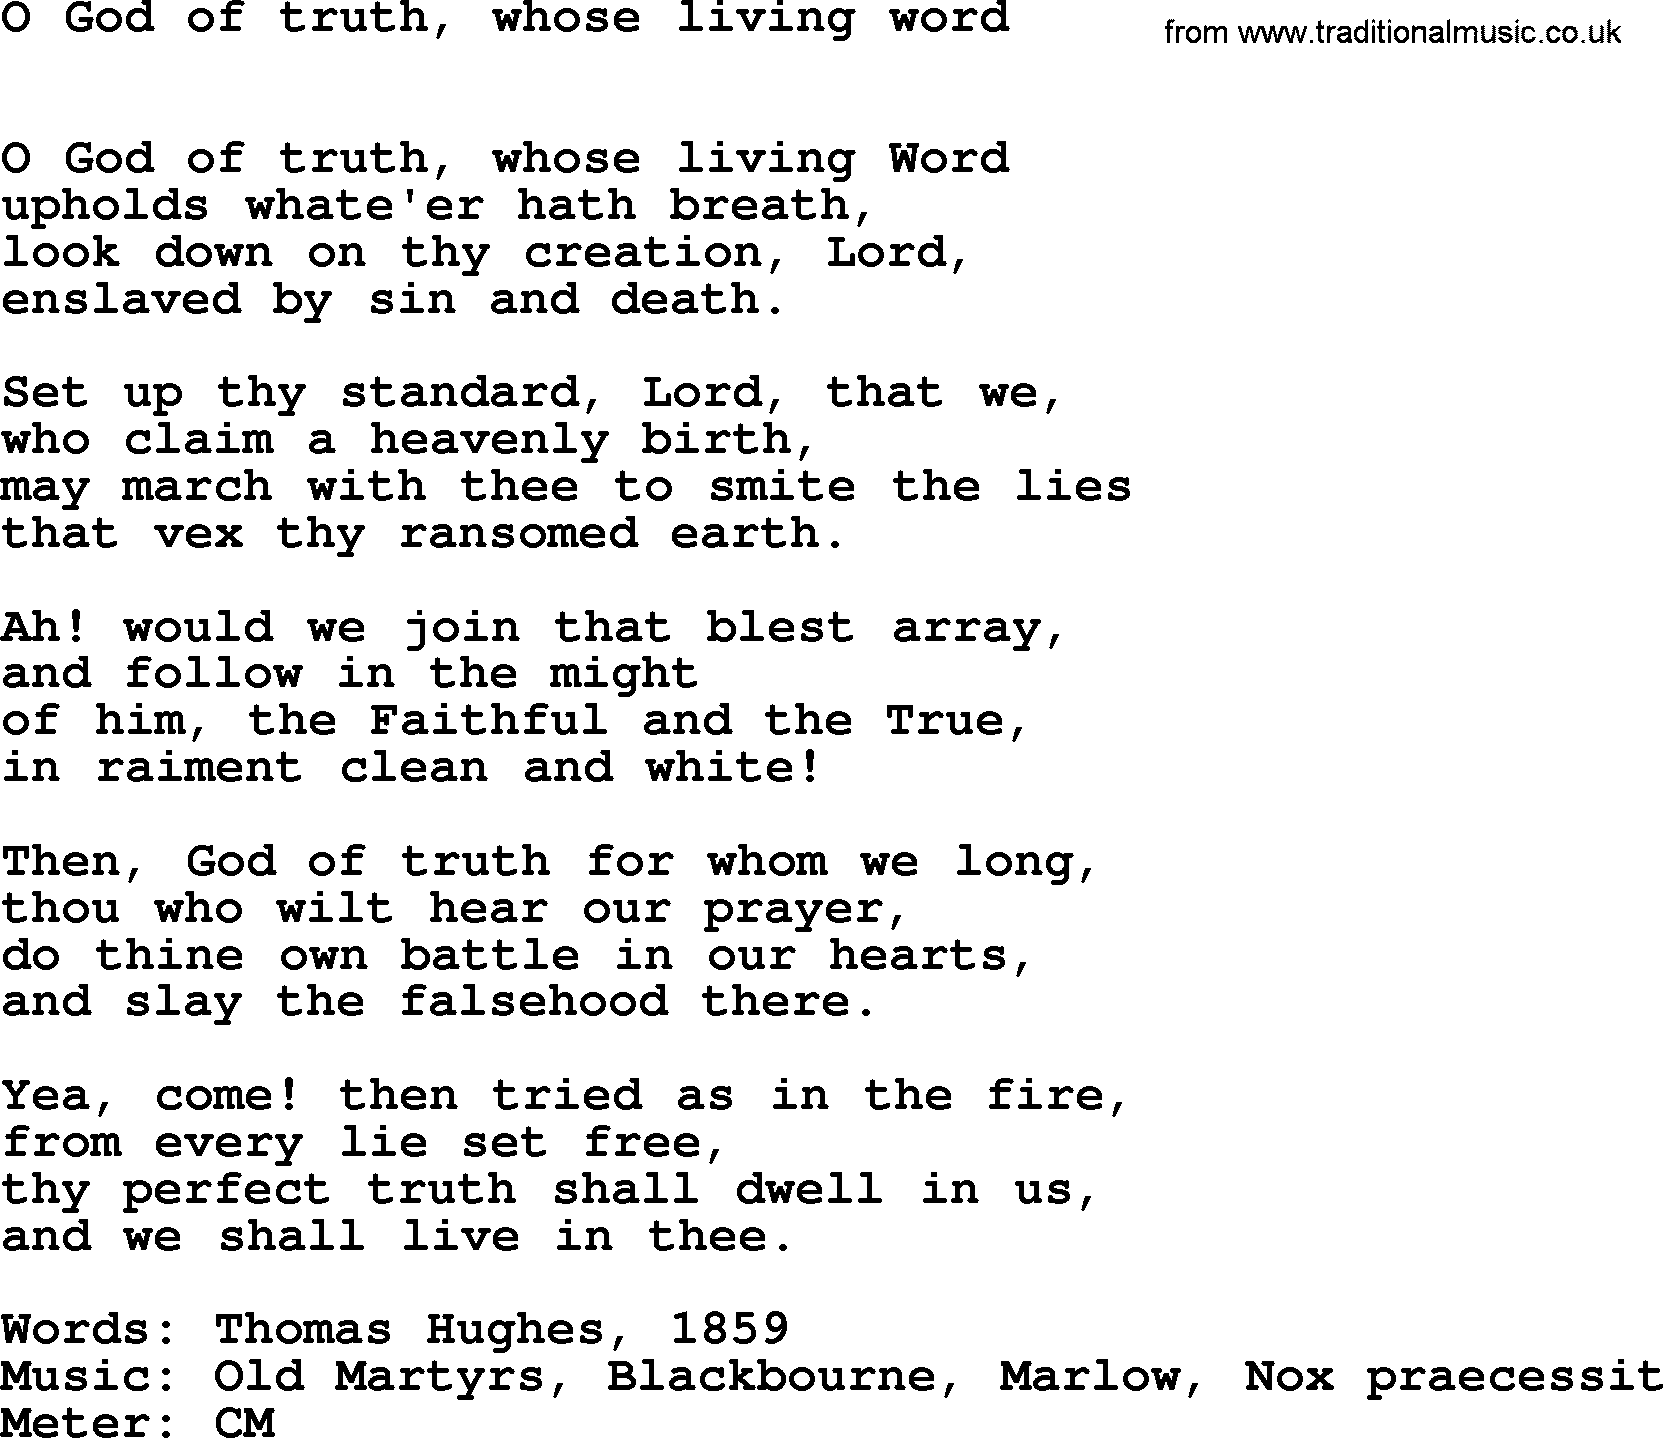 Book of Common Praise Hymn: O God Of Truth, Whose Living Word.txt lyrics with midi music